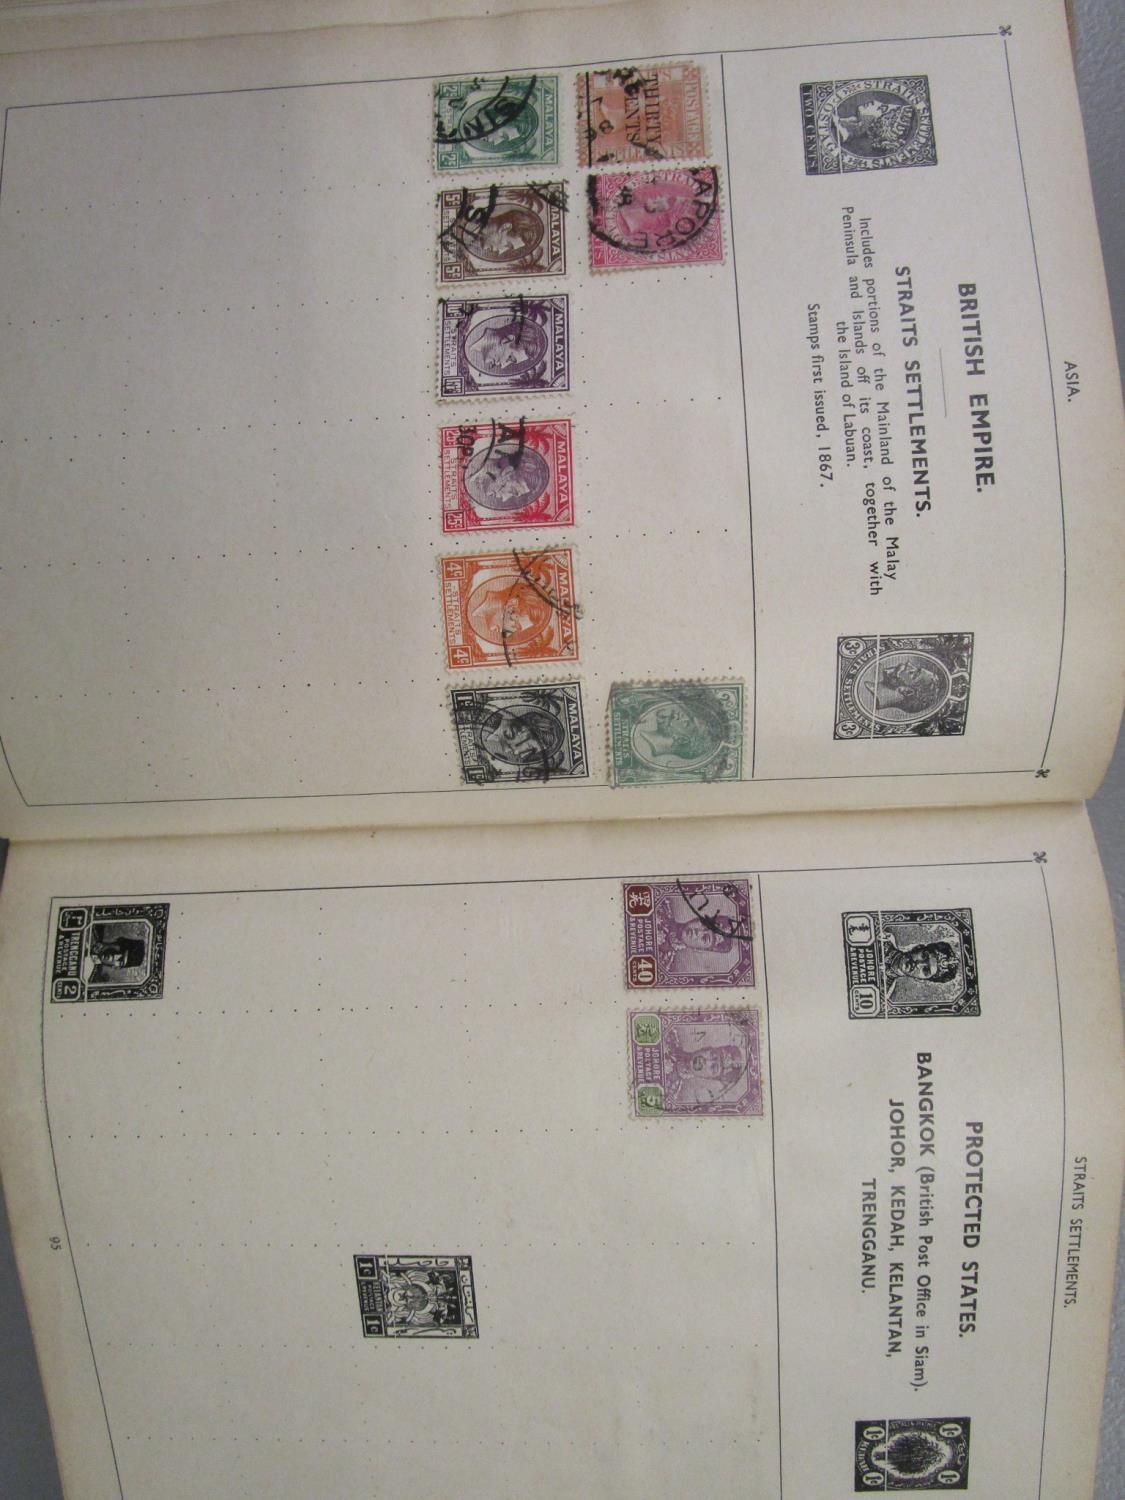 An early 20th century stamp album containing Victorian and early 20th century stamps from around the - Image 9 of 12